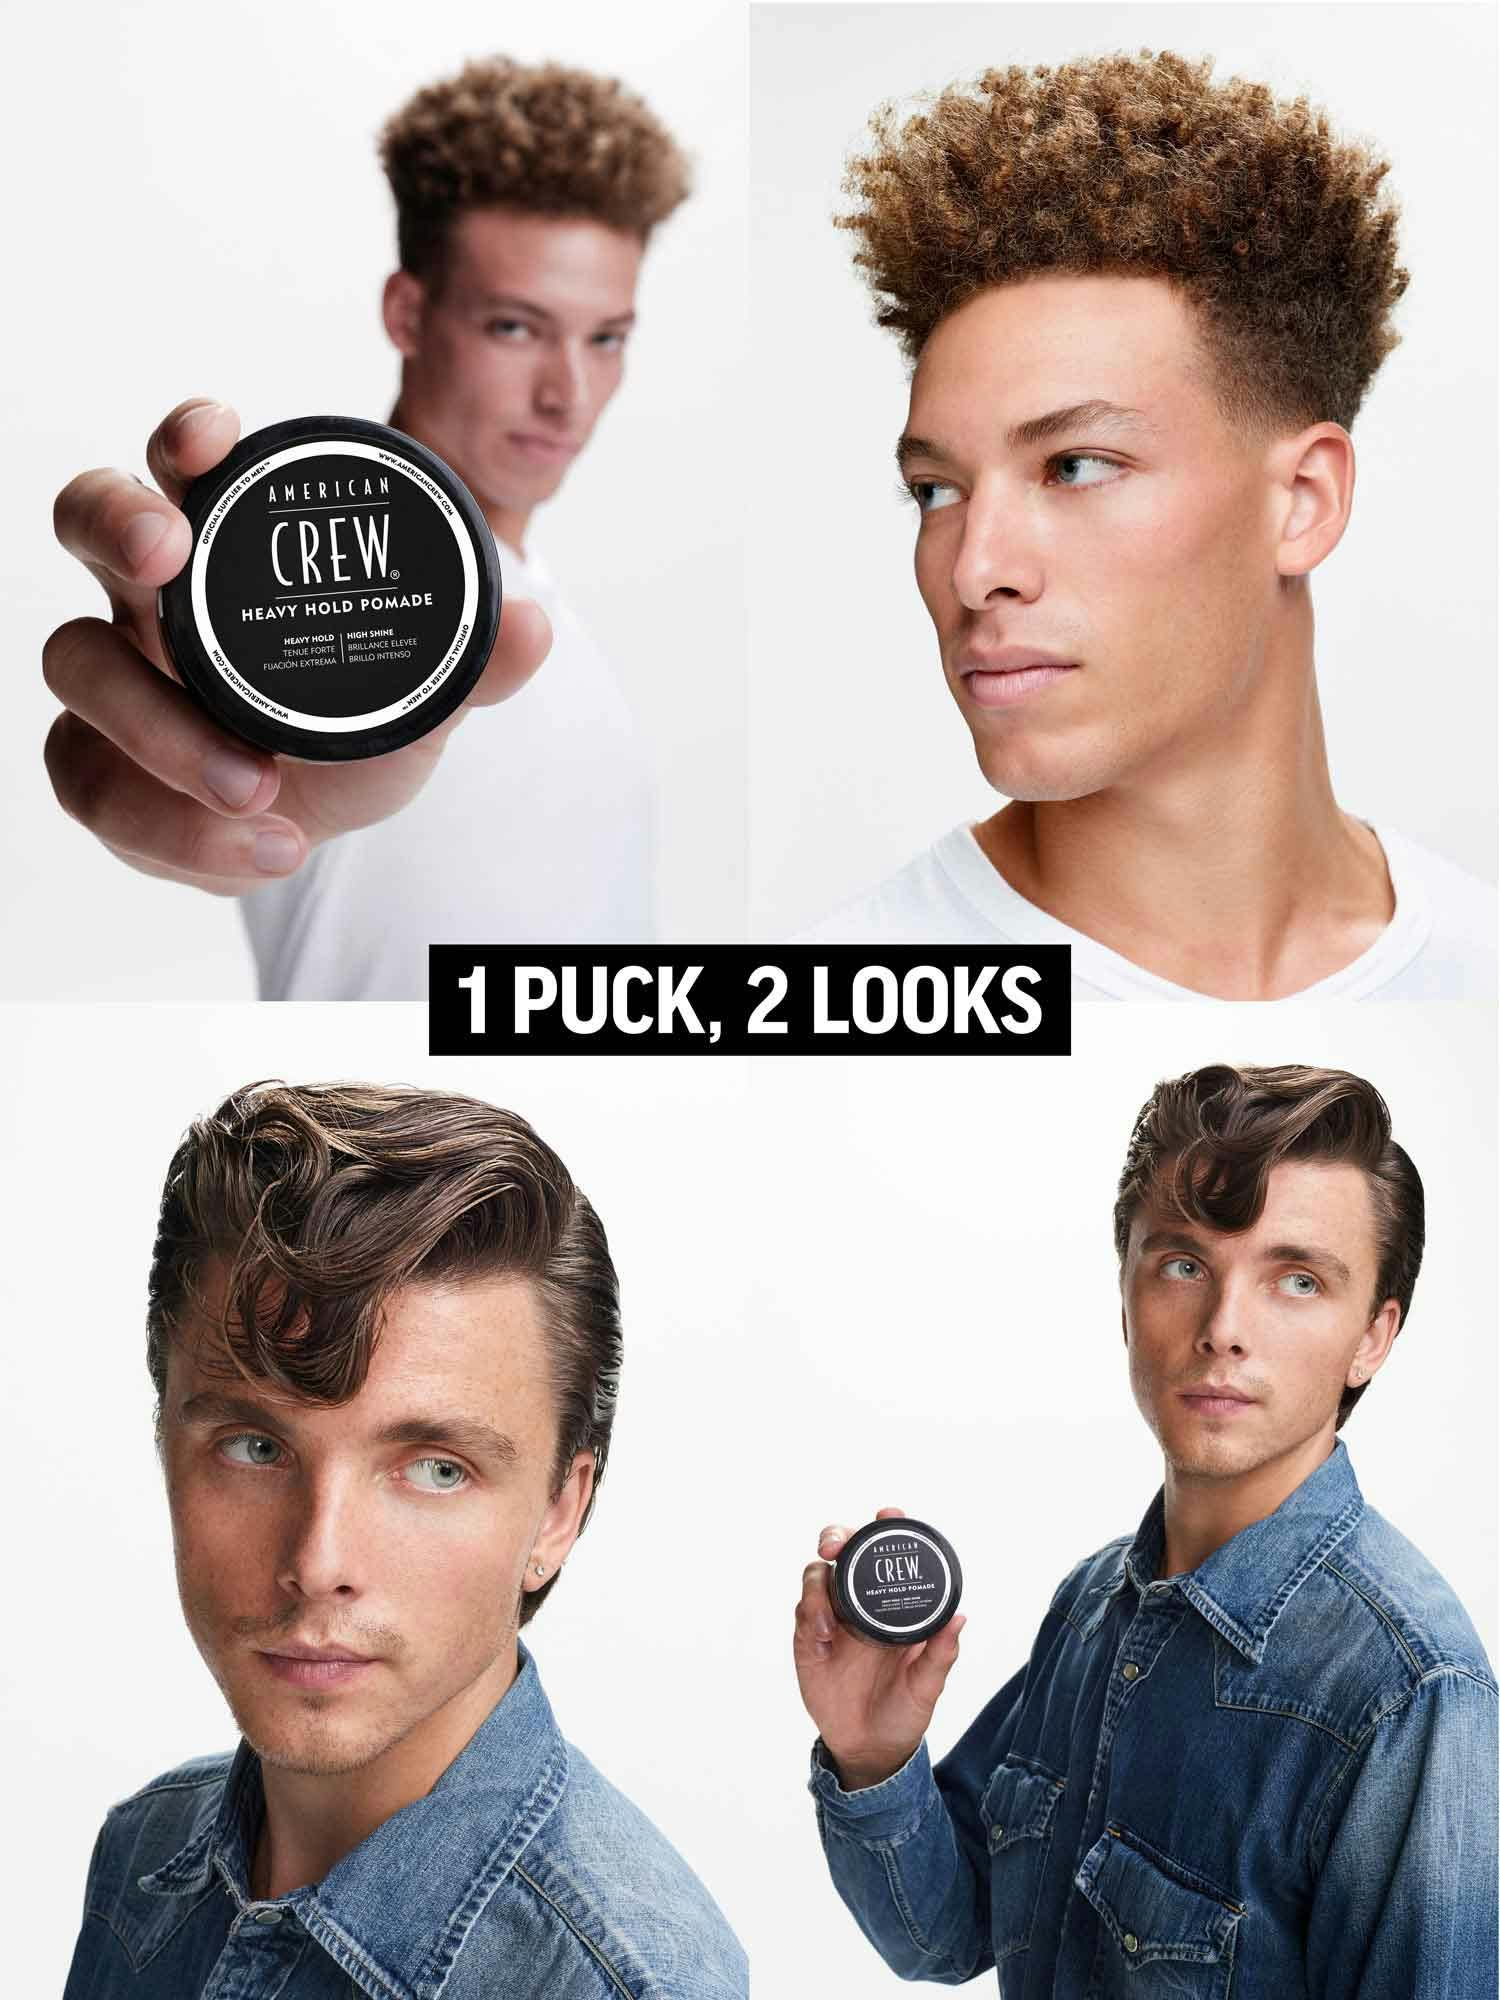 American Crew Heavy Hold Pomade Duo Bundle